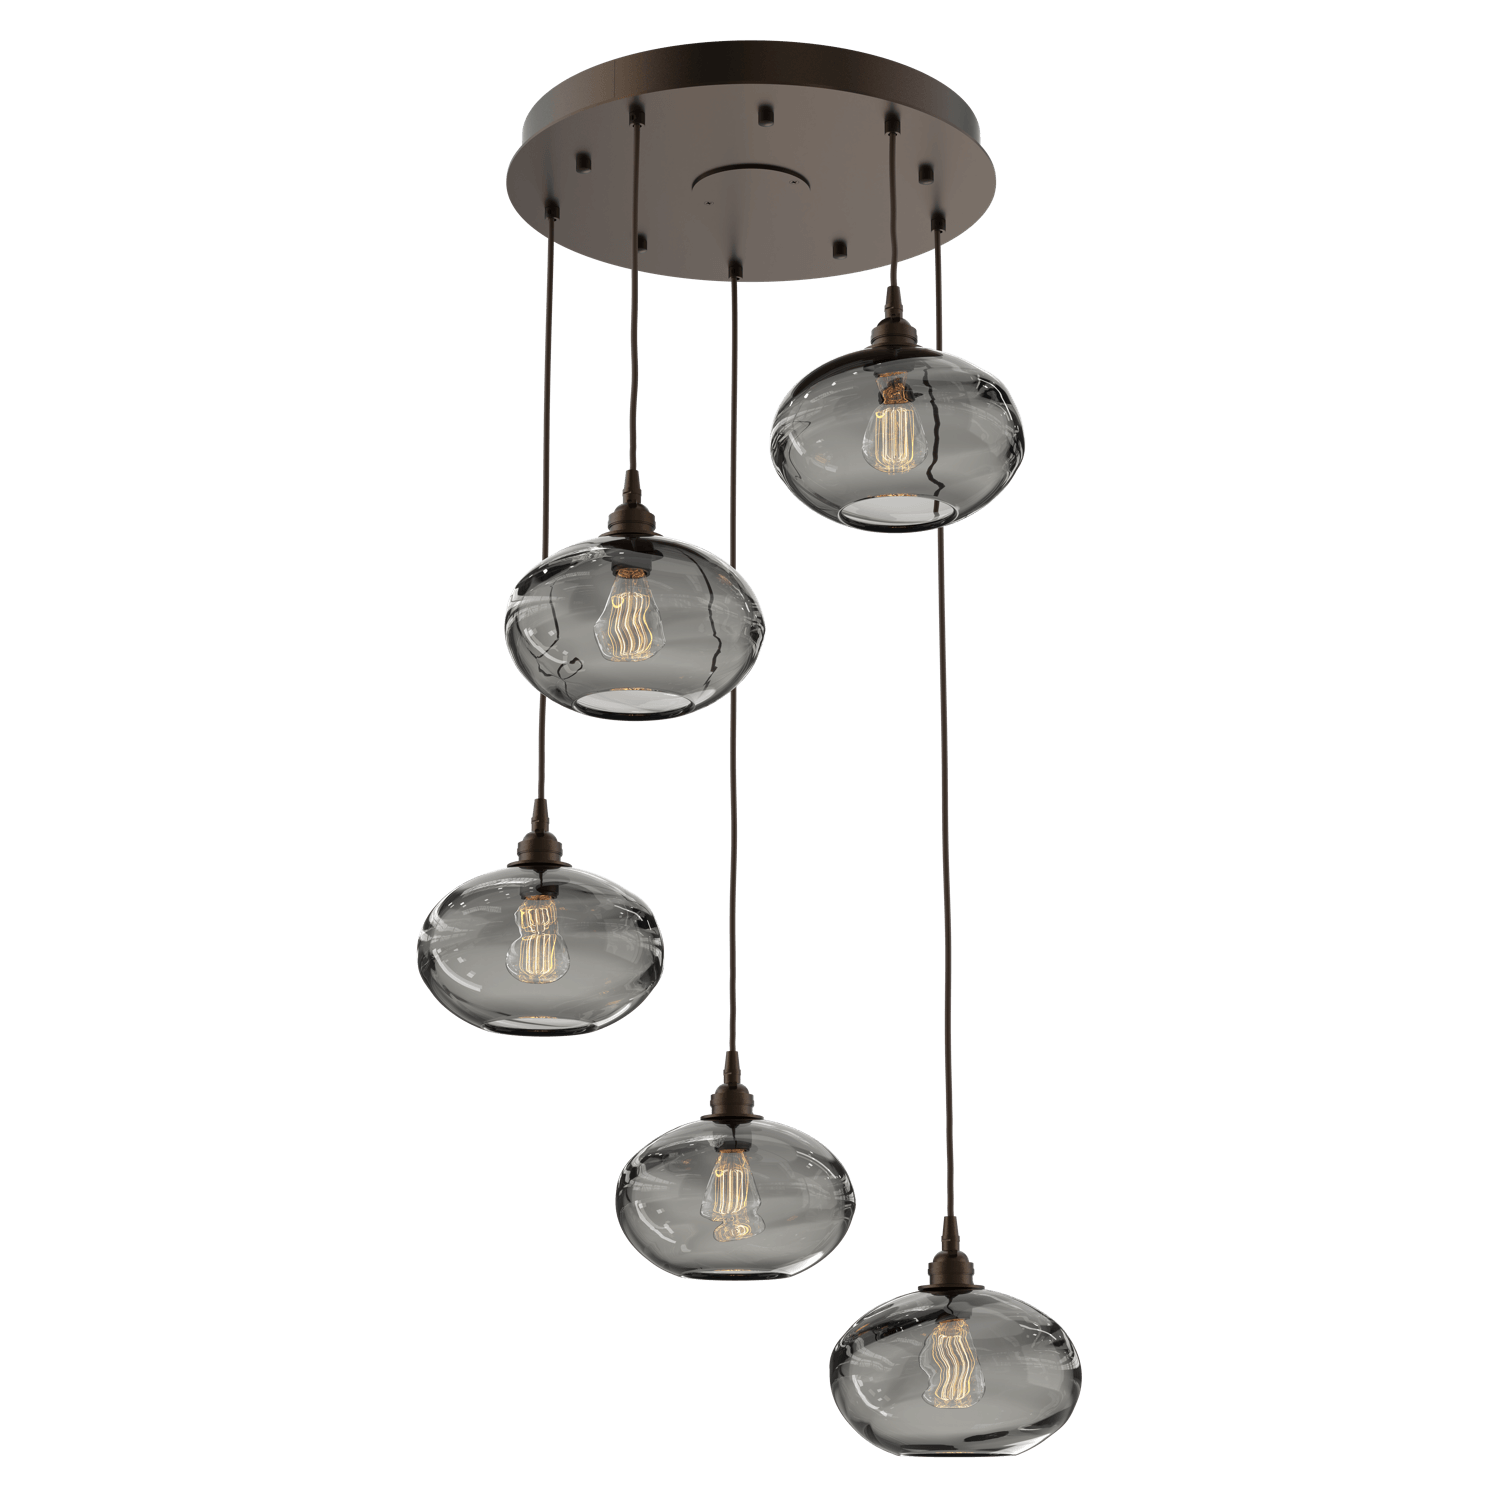 CHB0036-05-FB-OS-Hammerton-Studio-Optic-Blown-Glass-Coppa-5-light-round-pendant-chandelier-with-flat-bronze-finish-and-optic-smoke-blown-glass-shades-and-incandescent-lamping